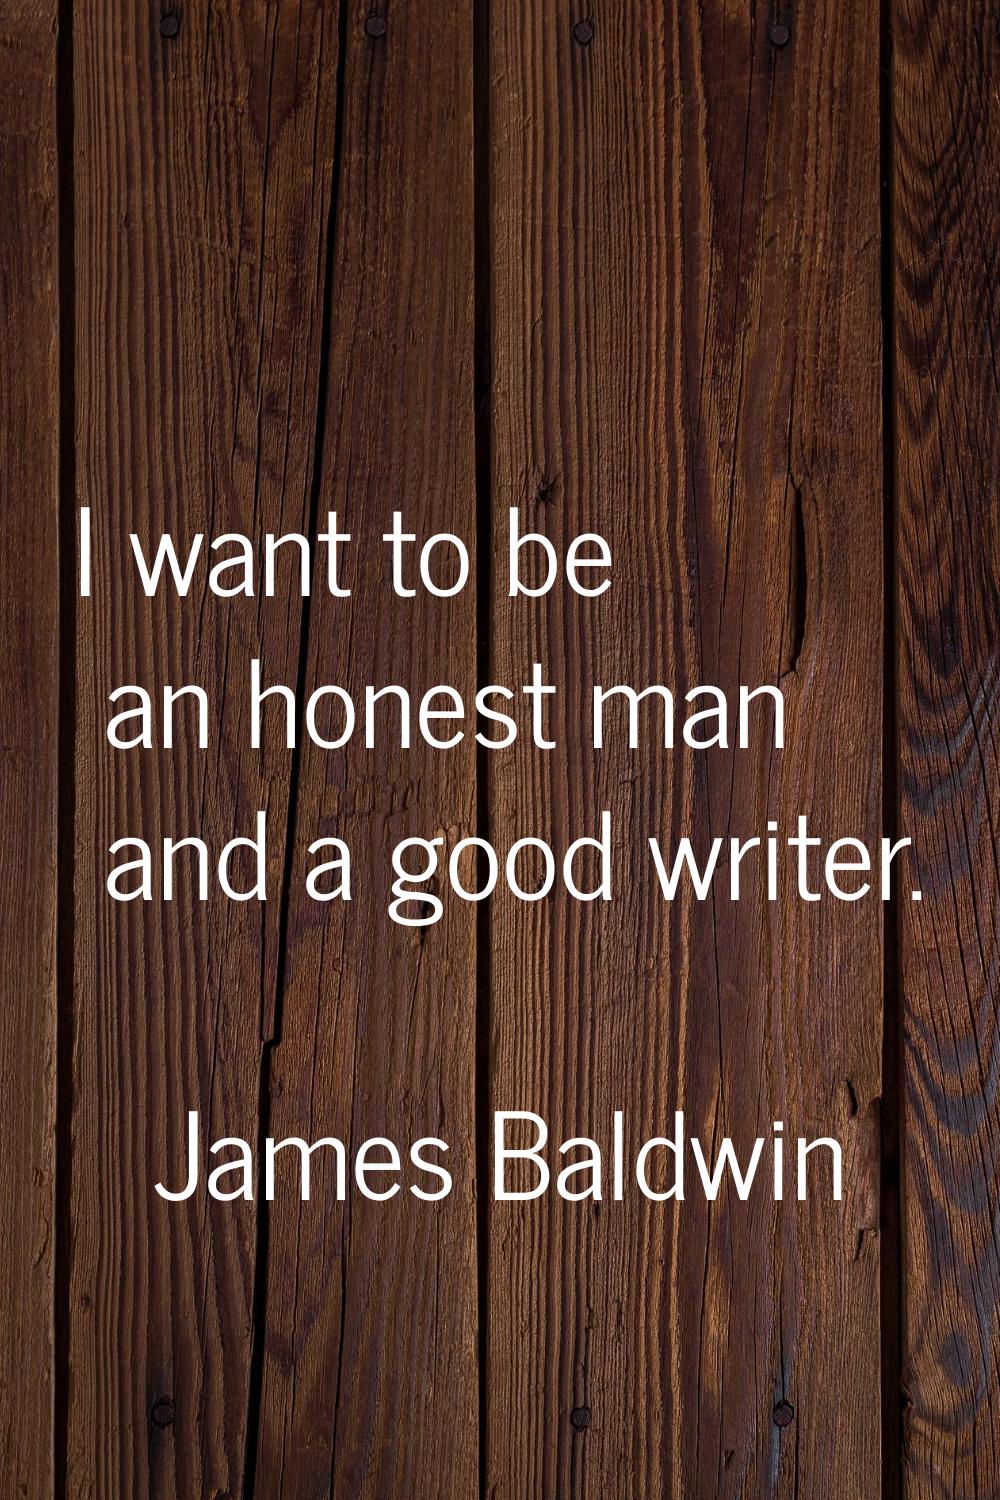 I want to be an honest man and a good writer.